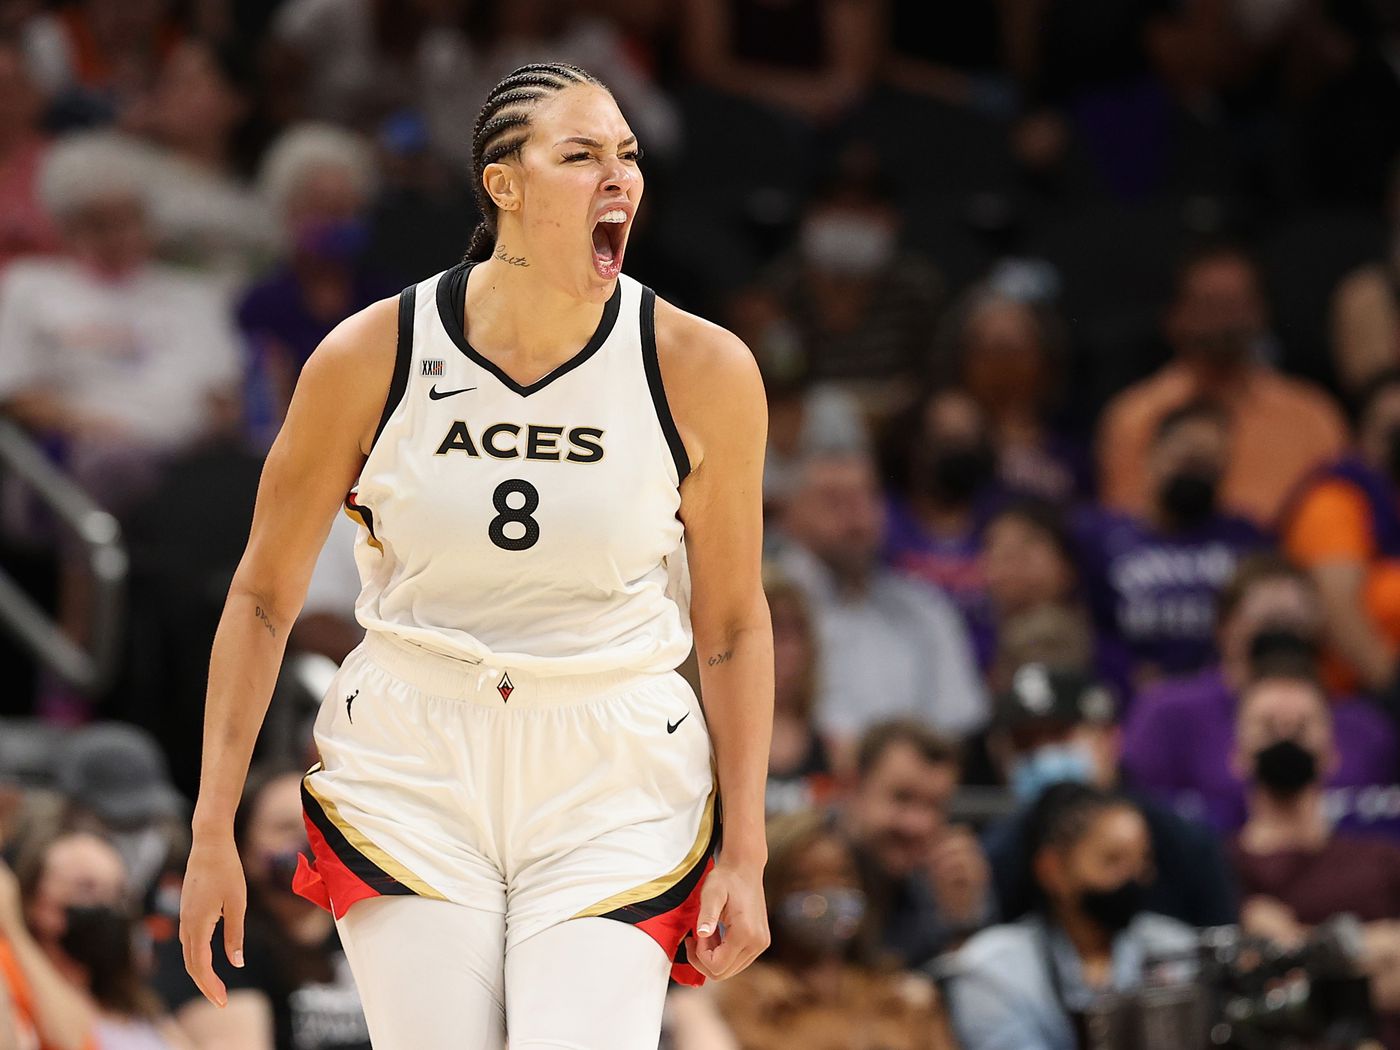 Liz Cambage blasts WNBA for coach Becky Hammon earning 4x more than max  player 